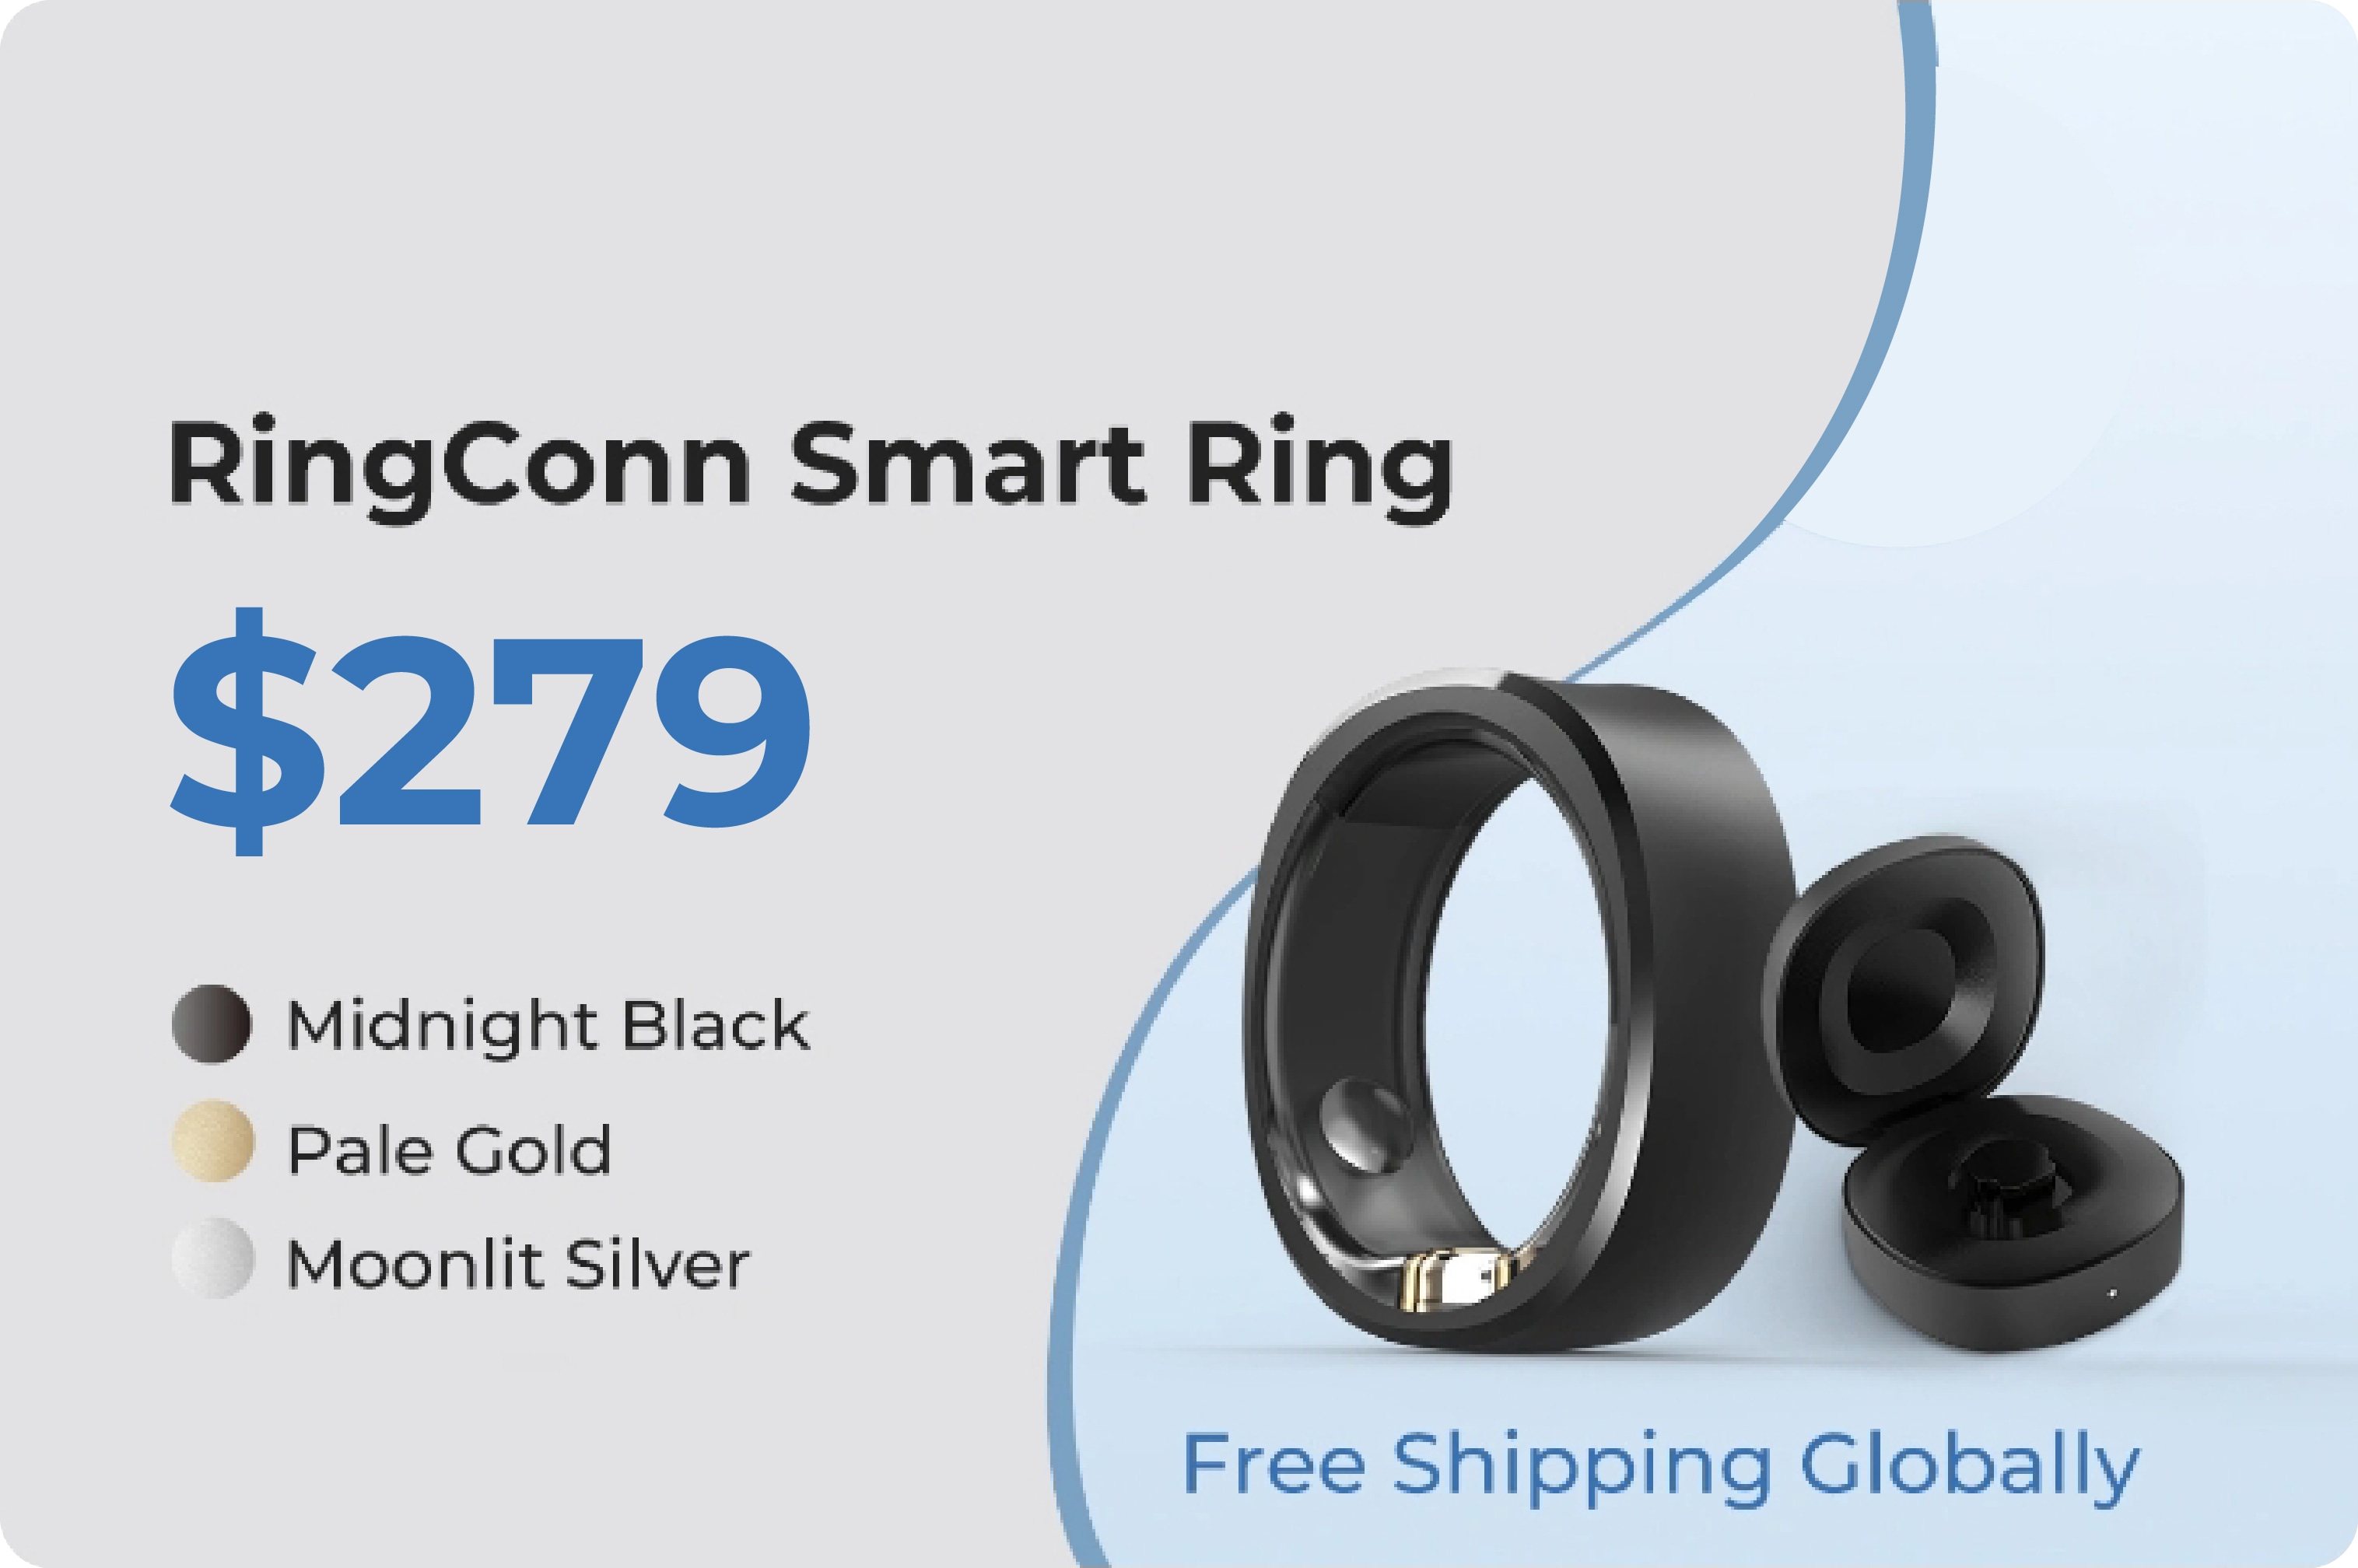 Hi! I'm about to purchase a RingConn. But I need to know one last